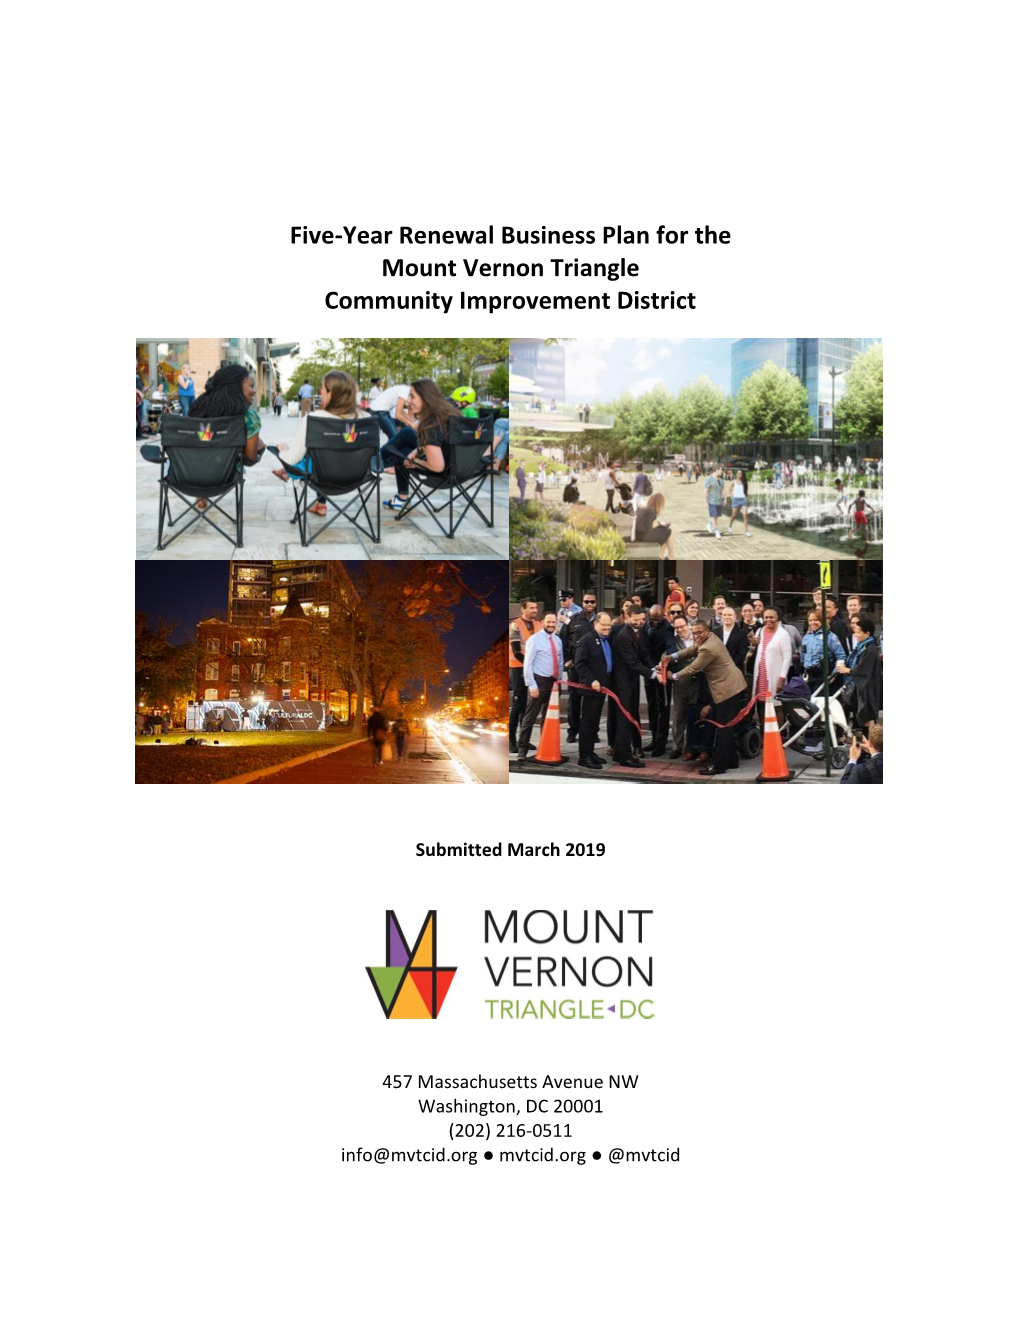 Five-Year Renewal Business Plan for the Mount Vernon Triangle Community Improvement District